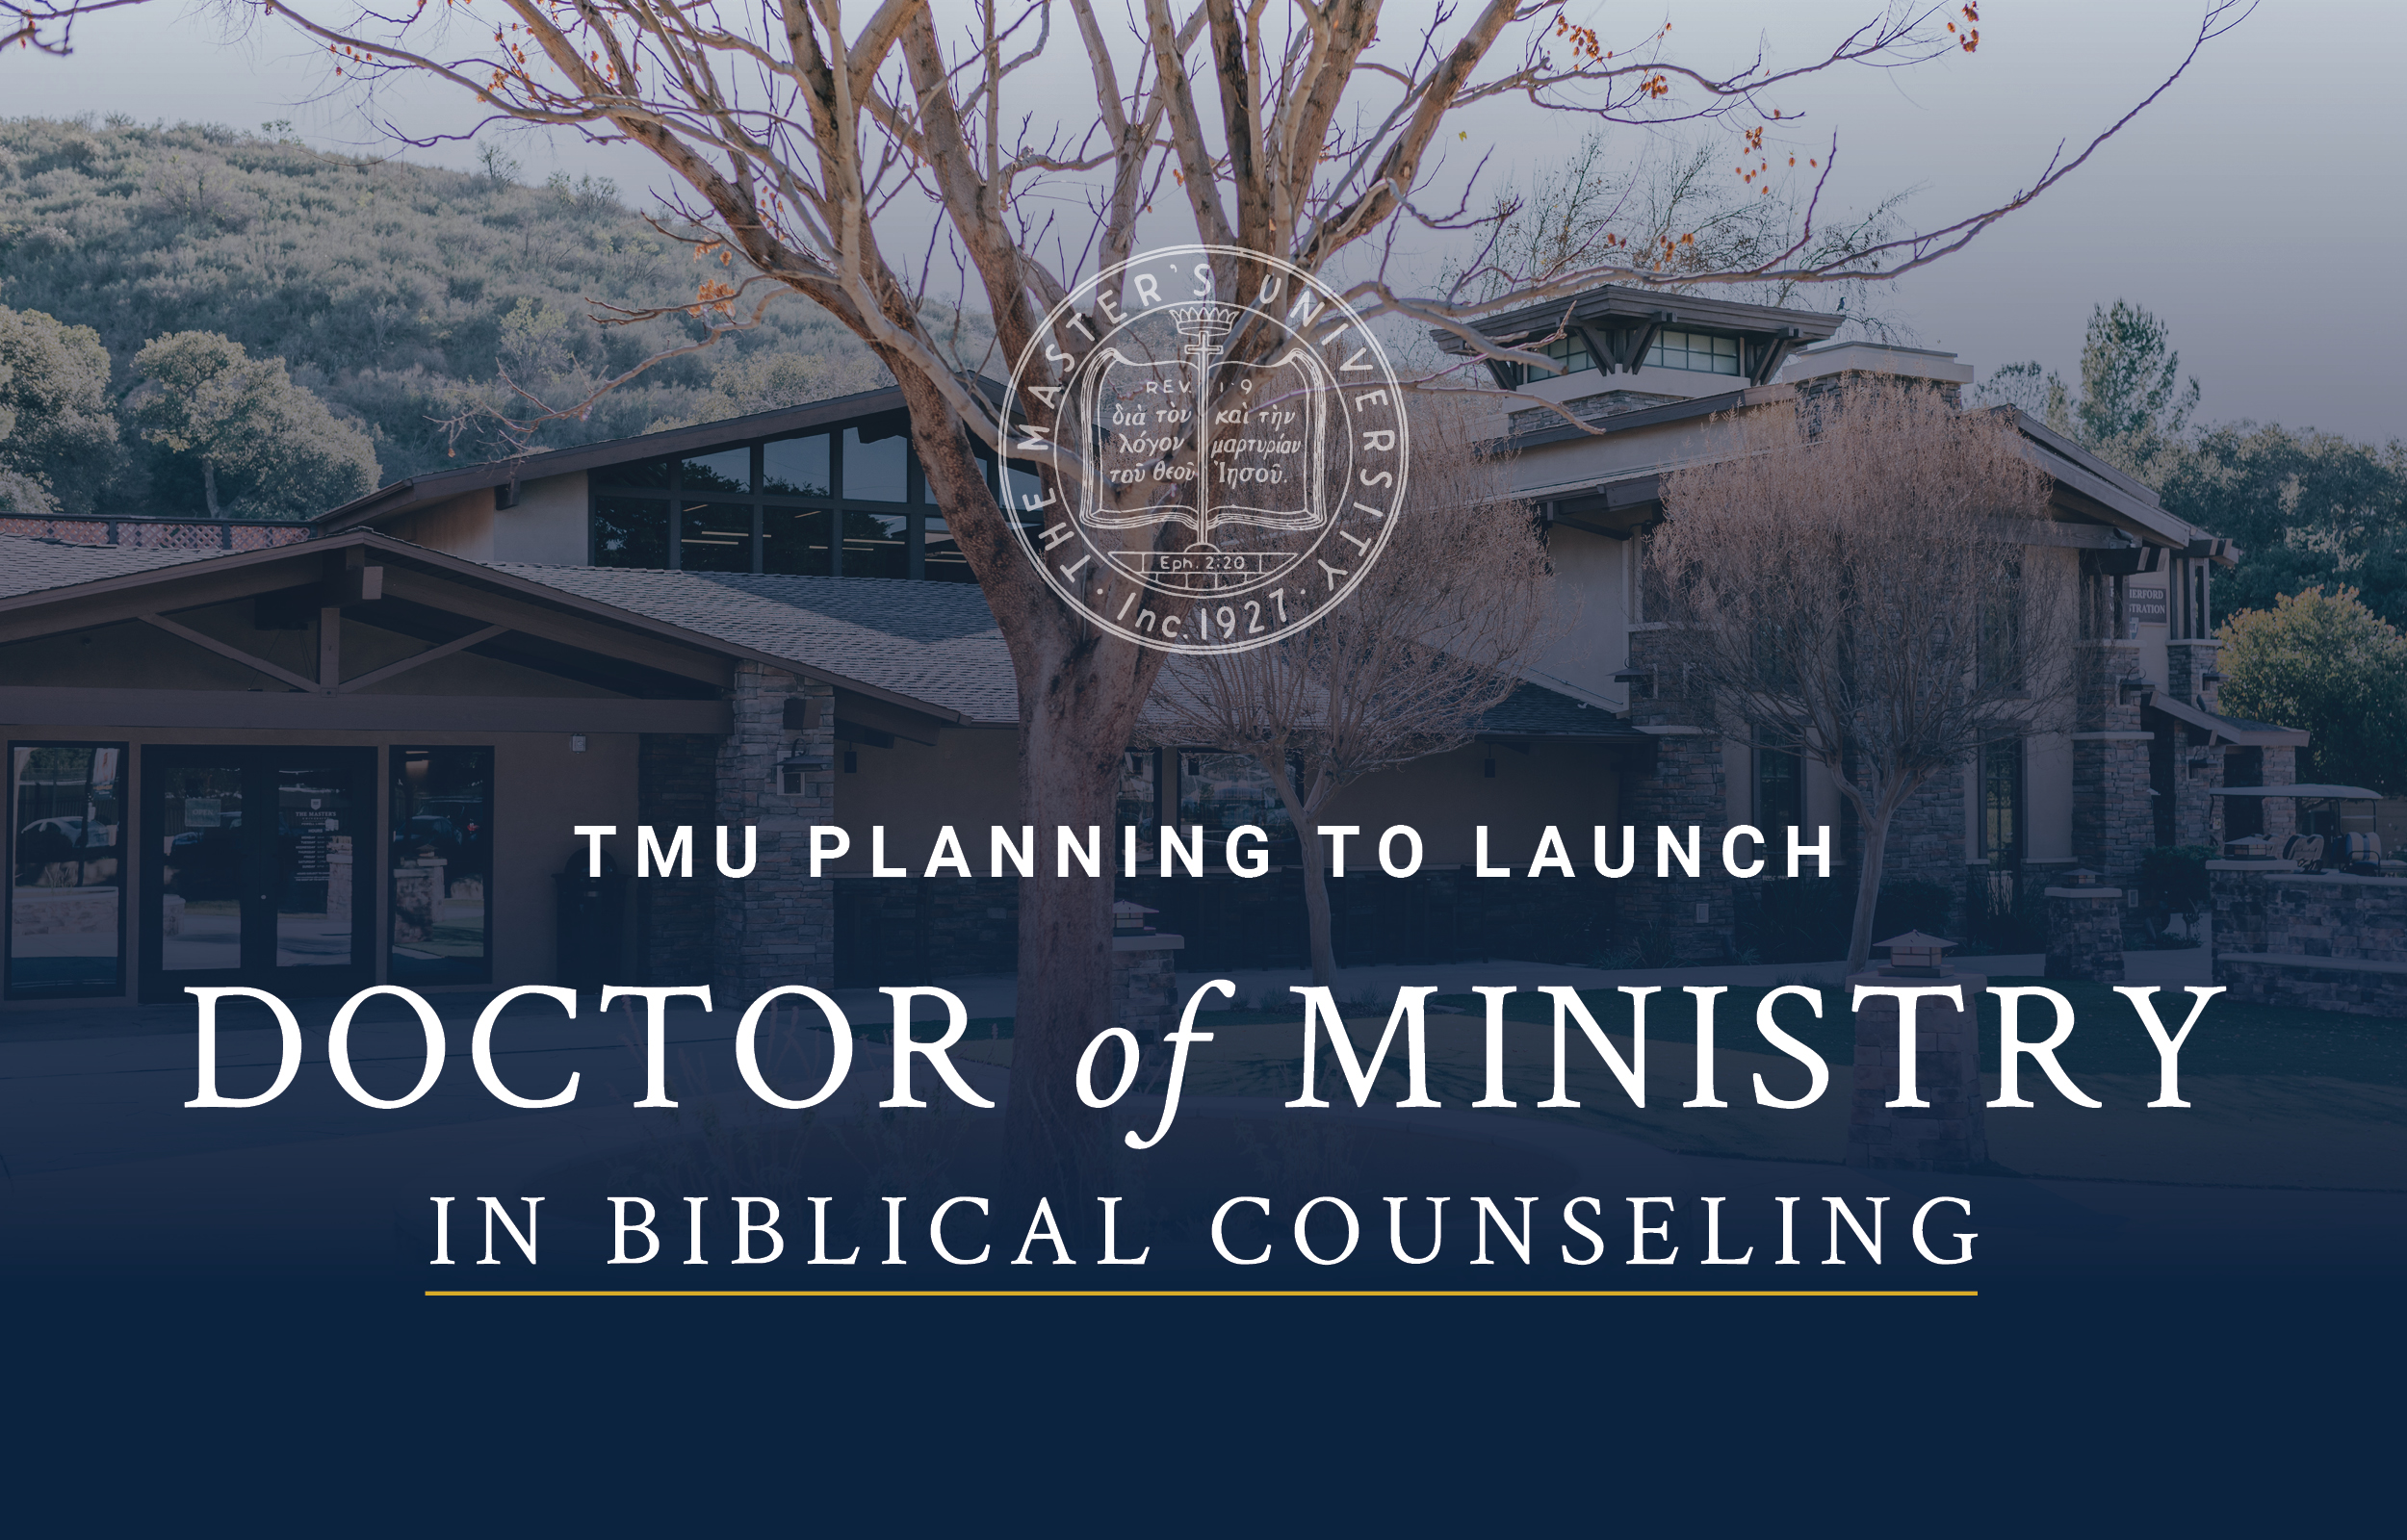 TMU Planning to Launch Doctor of Ministry in Biblical Counseling Program image